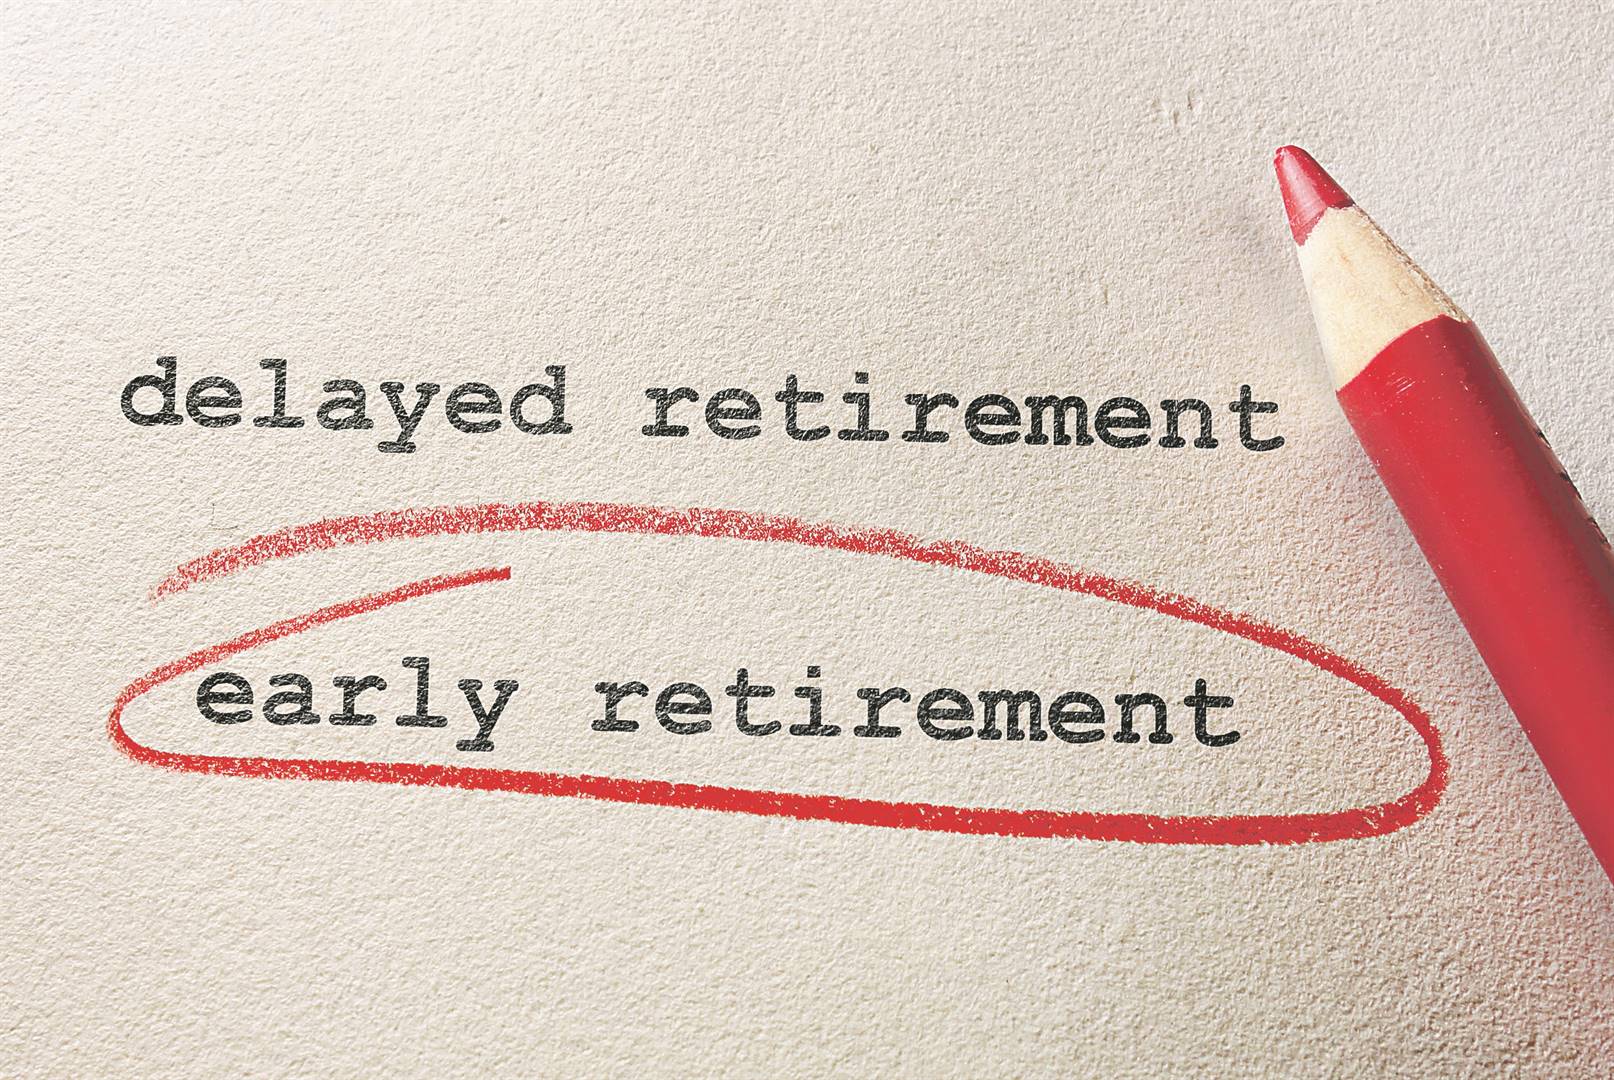 Early retirement is tempting, but can you afford it?